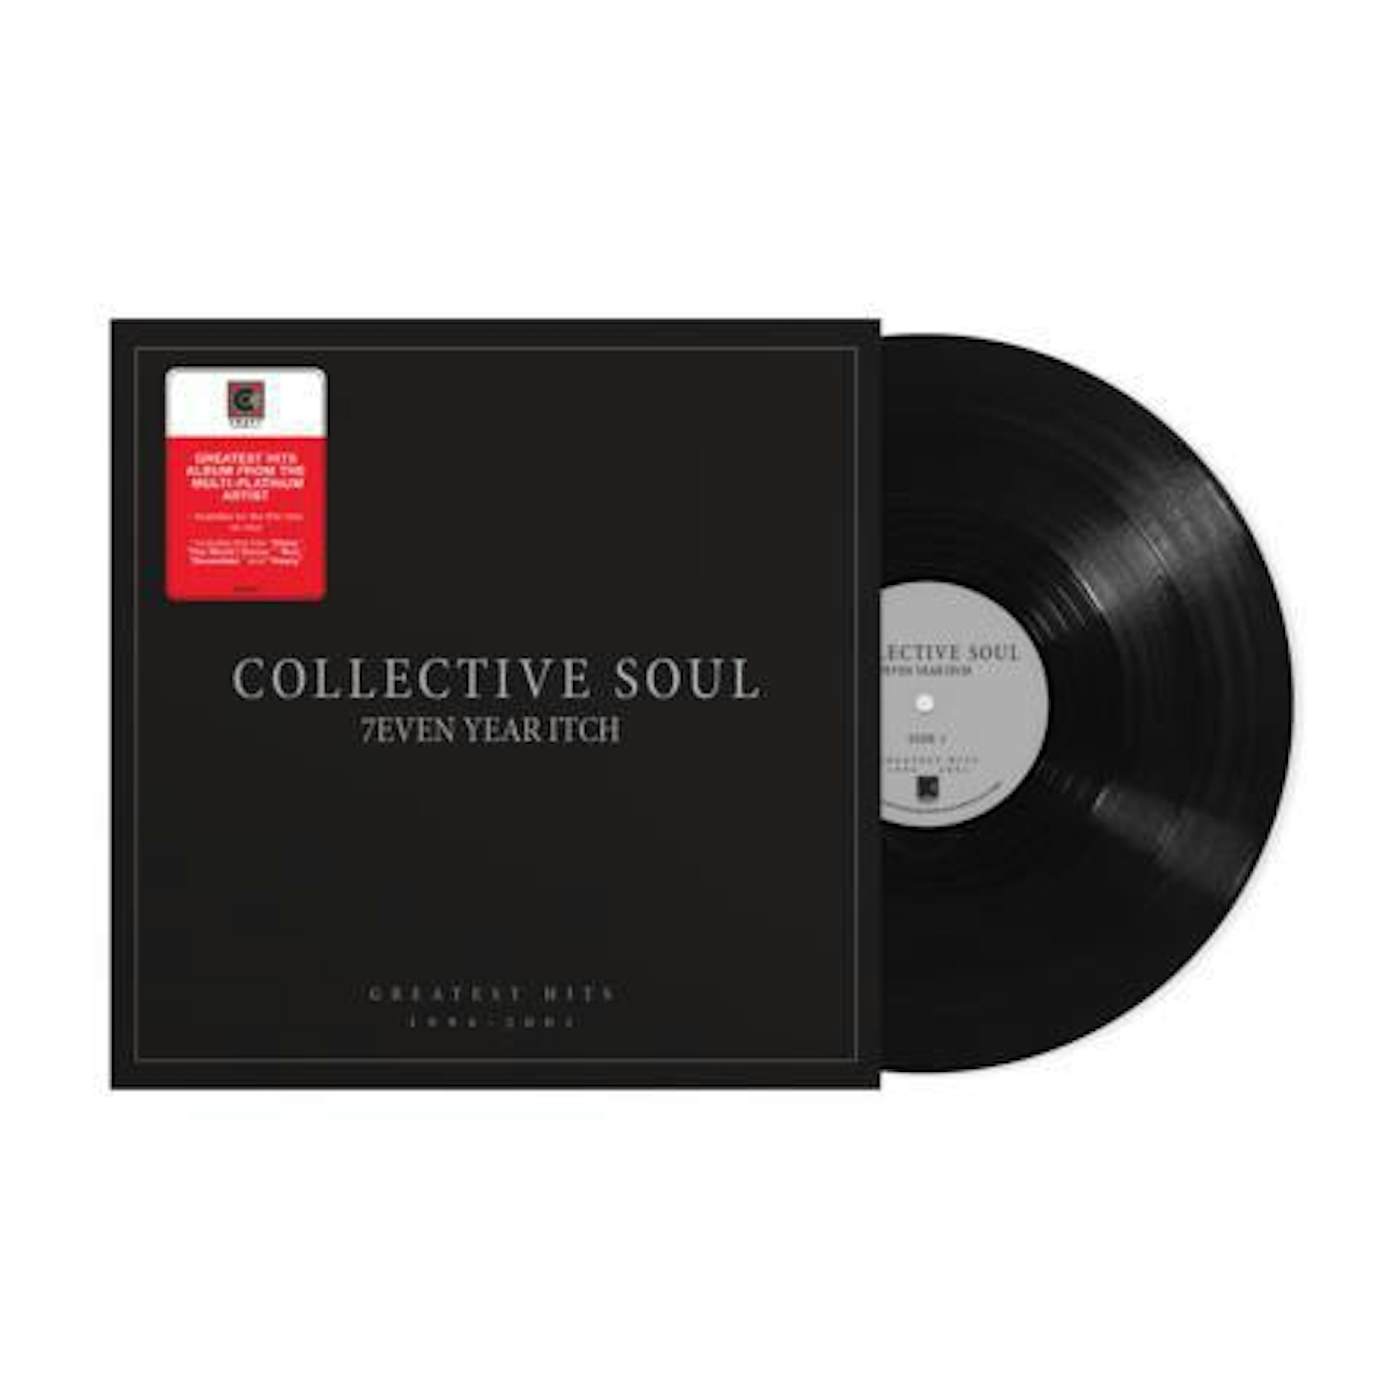 Collective Soul 7even Year Itch: Greatest Hits, 1994-2001 Vinyl Record